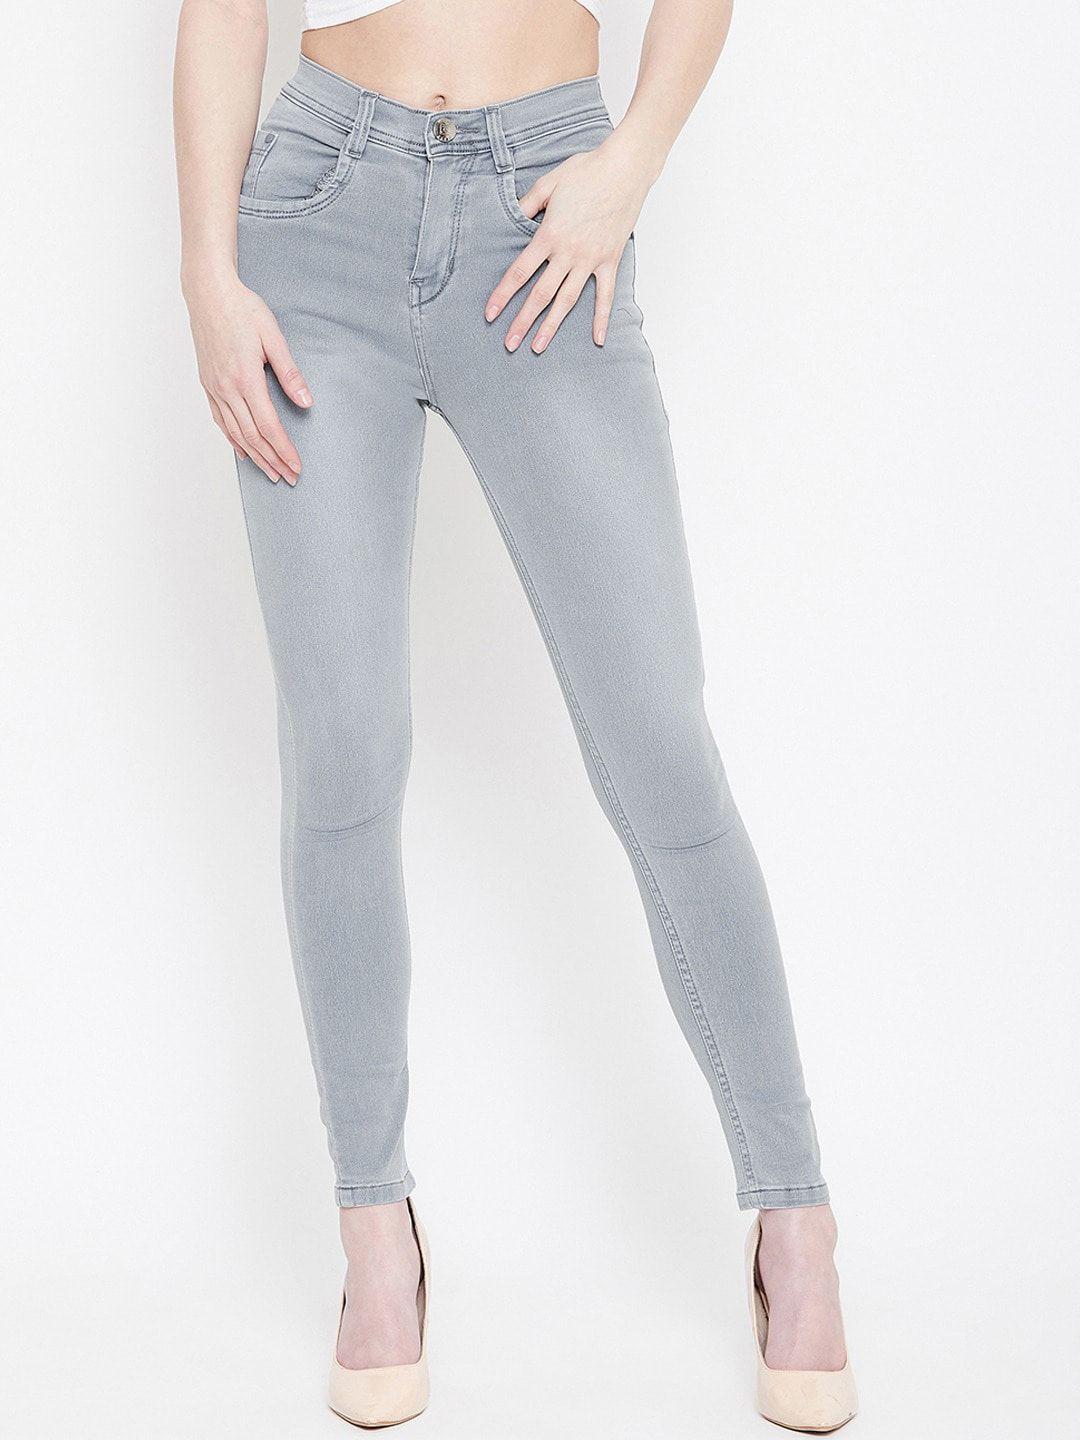 nifty women super skinny fit mid-rise light fade stretchable jeans